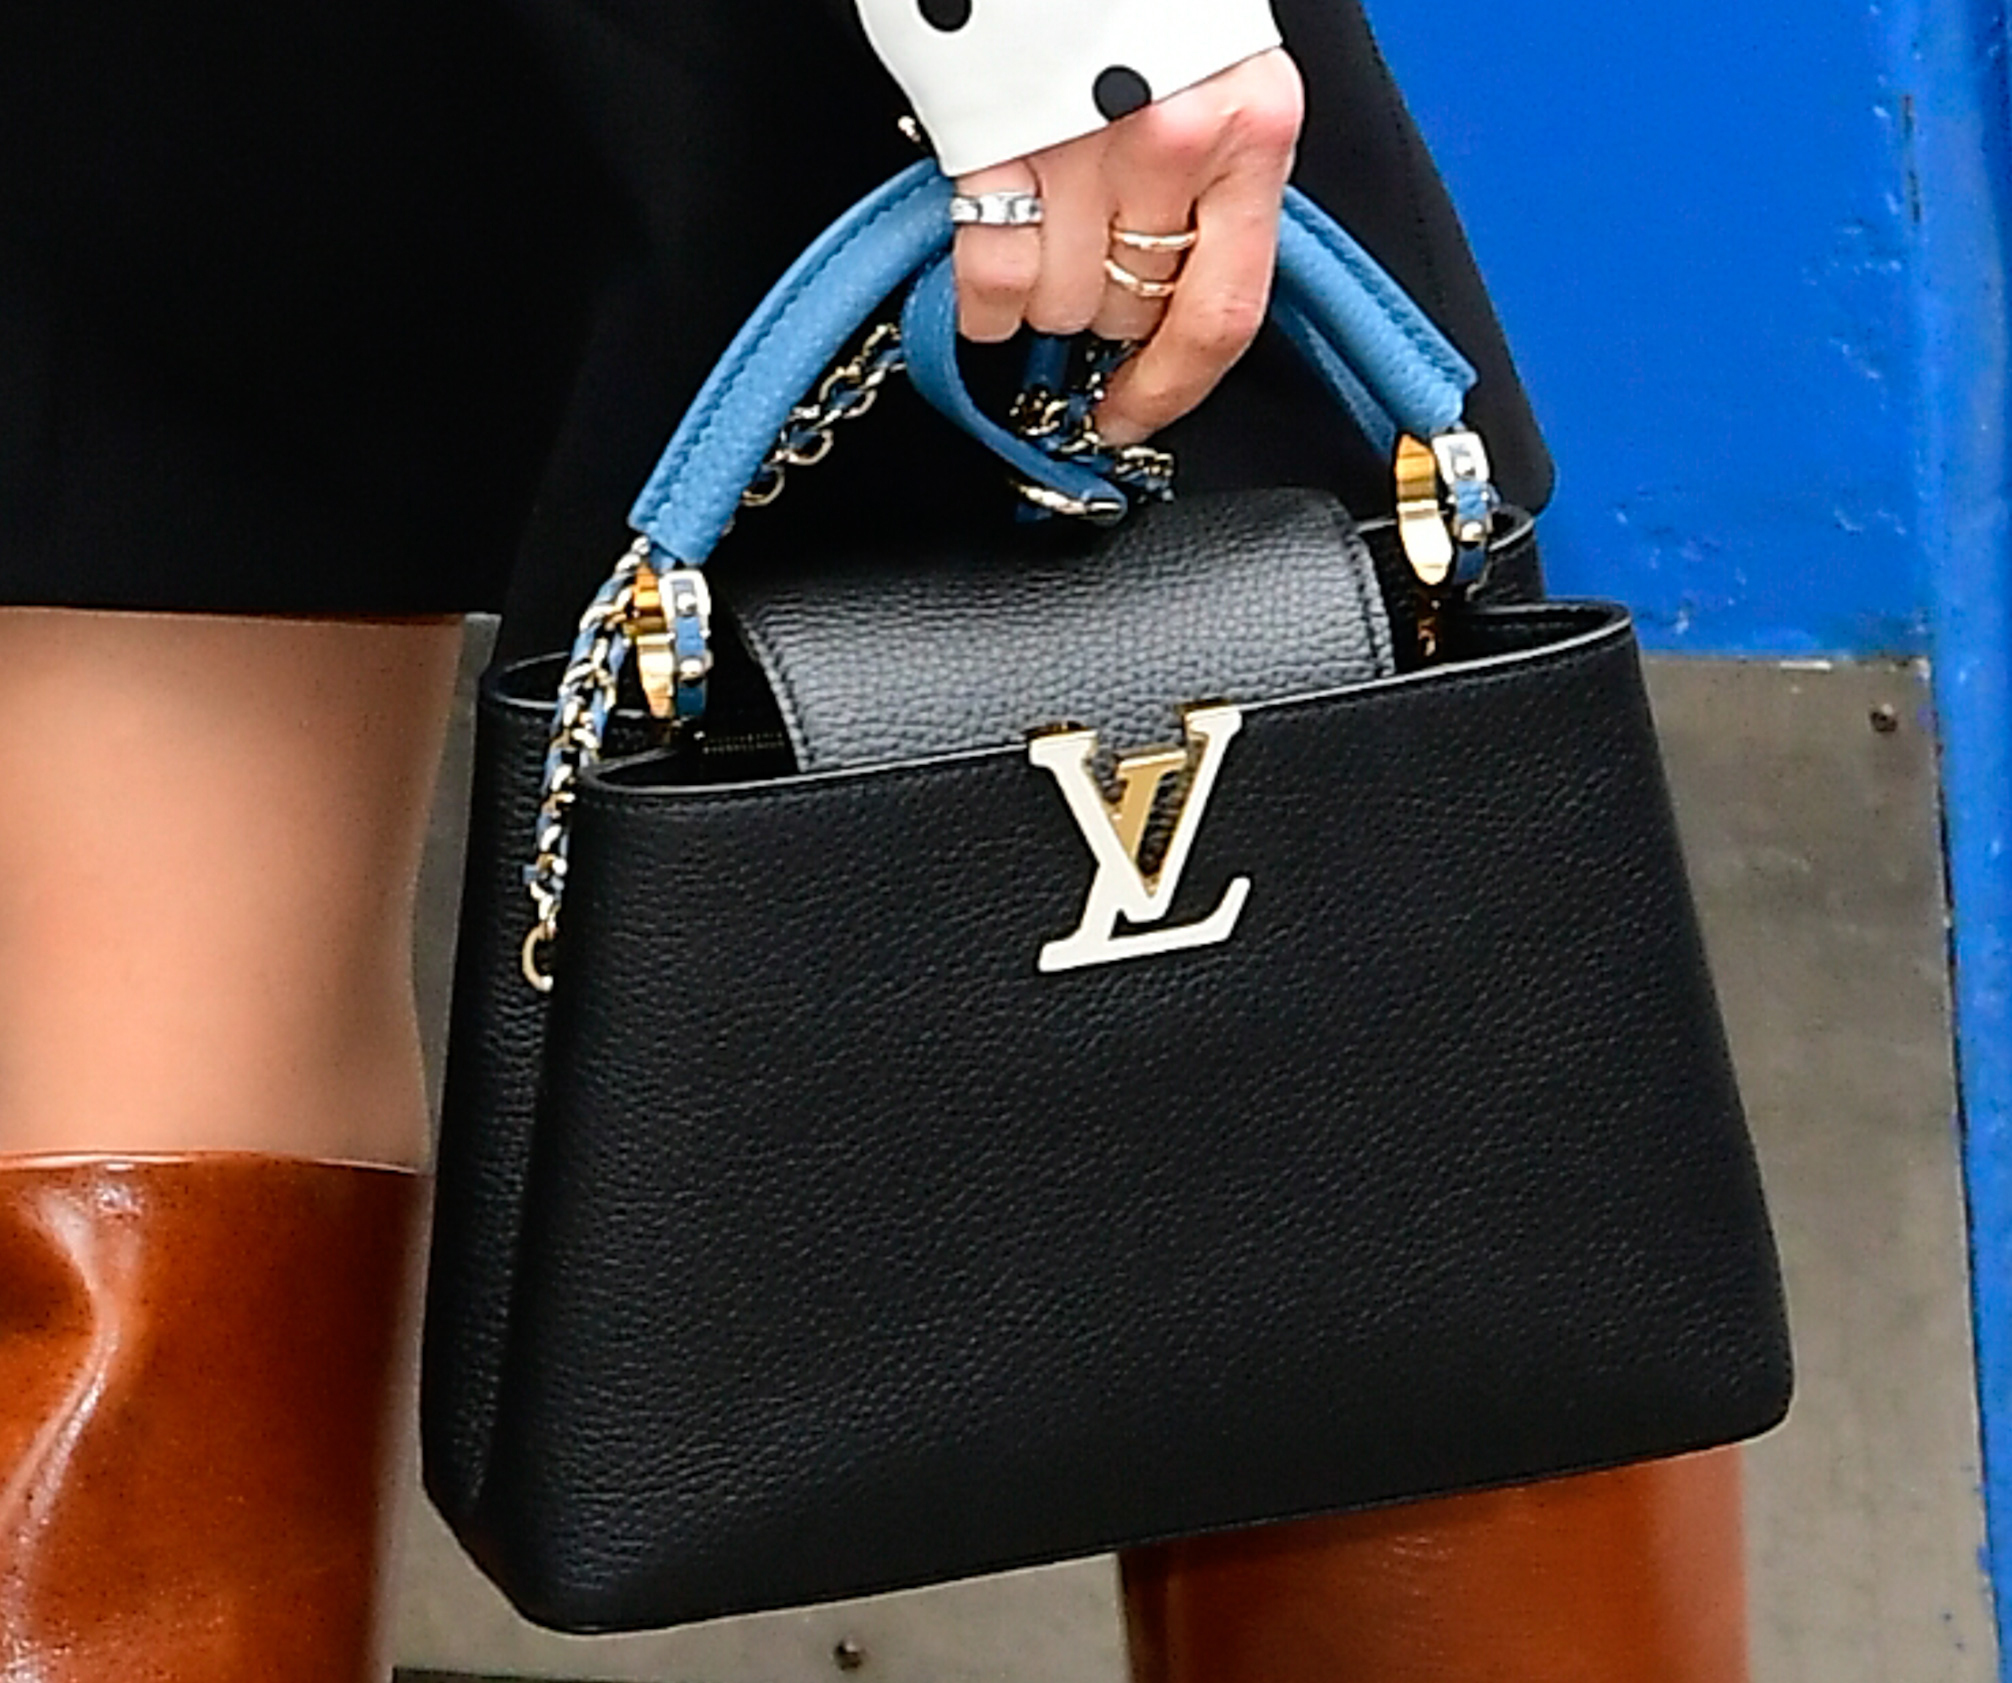 Feeling a new kind of classic aesthetic with @louisvuitton